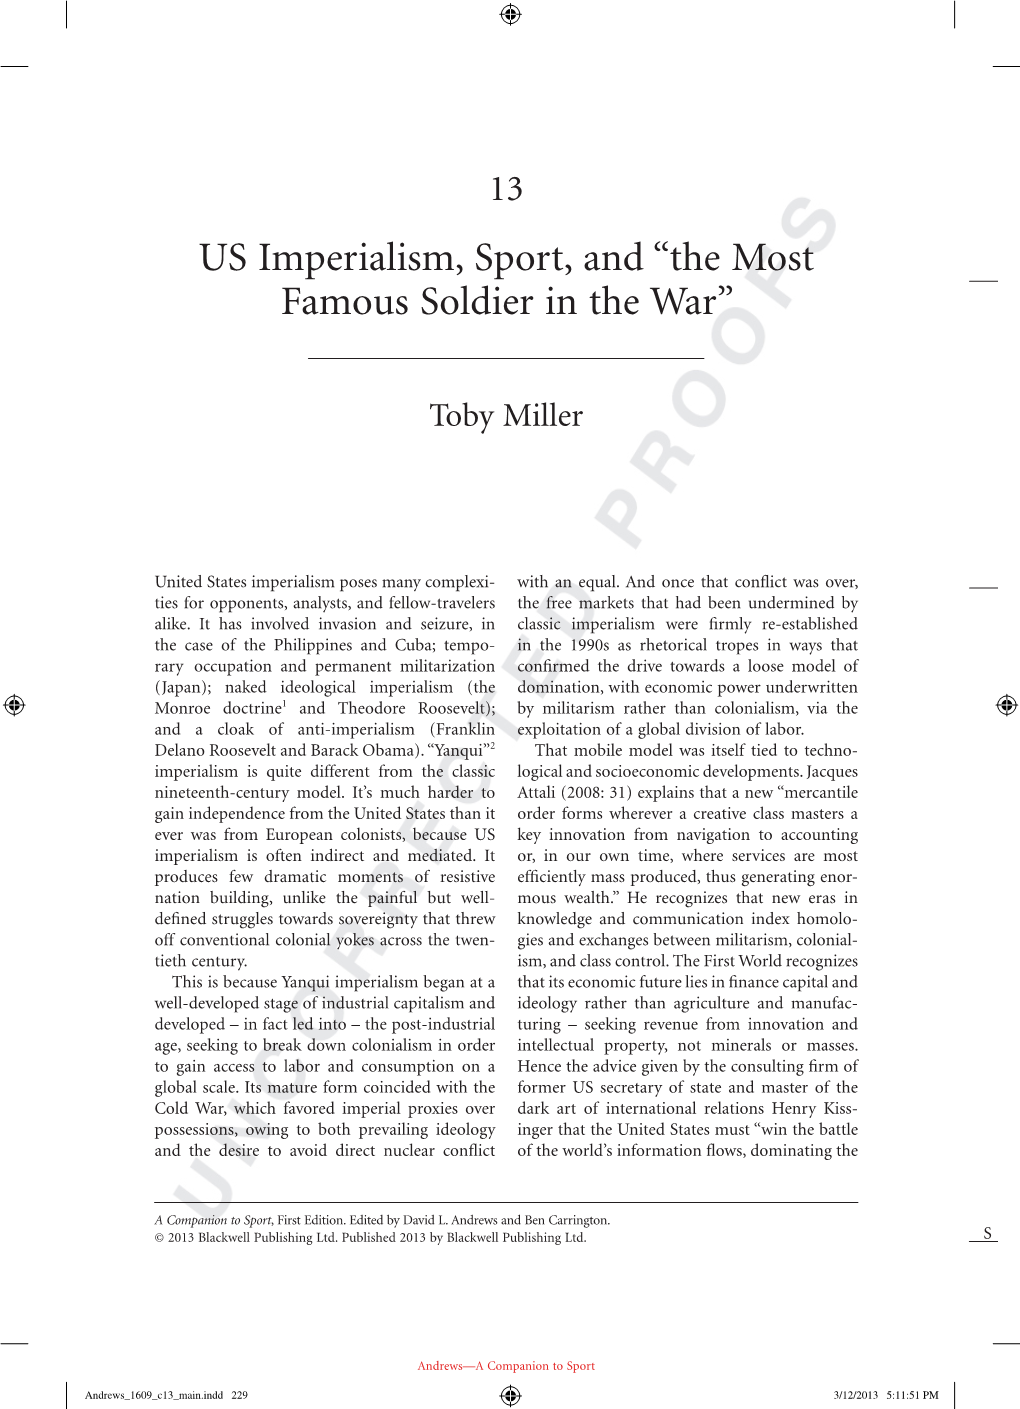 US Imperialism, Sport, and “The Most Famous Soldier in the War”